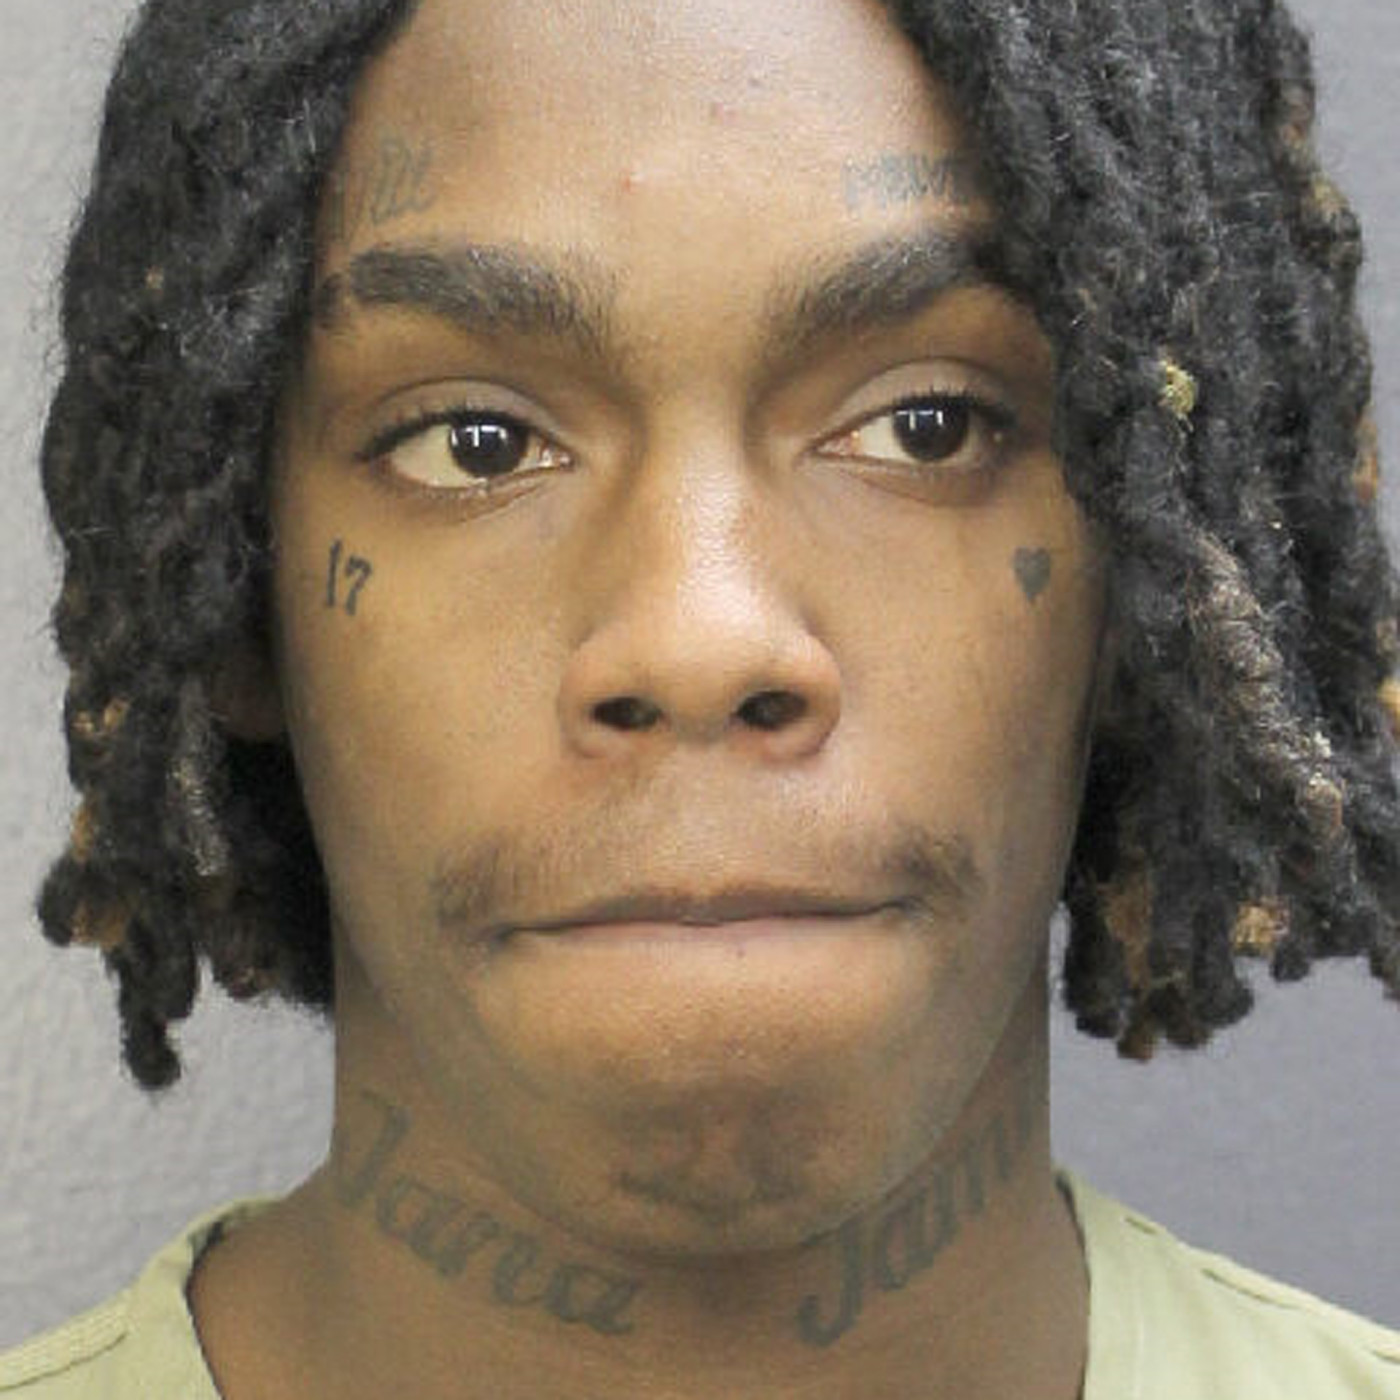 Ynw Melly A Timeline Of His Legal Situation And Murder Arrest